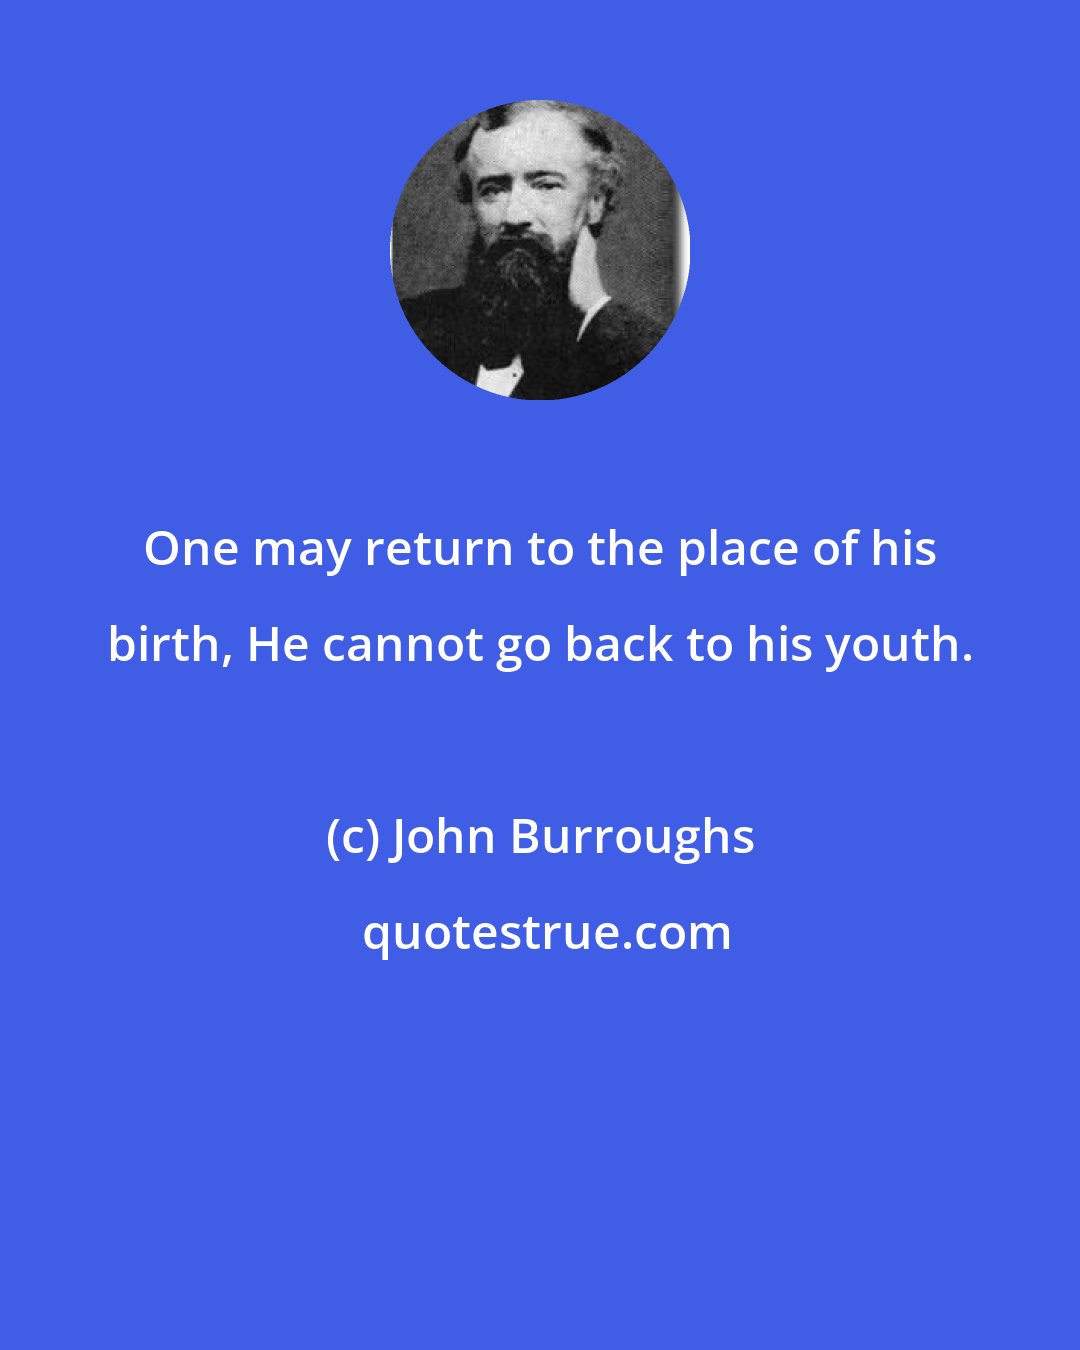 John Burroughs: One may return to the place of his birth, He cannot go back to his youth.